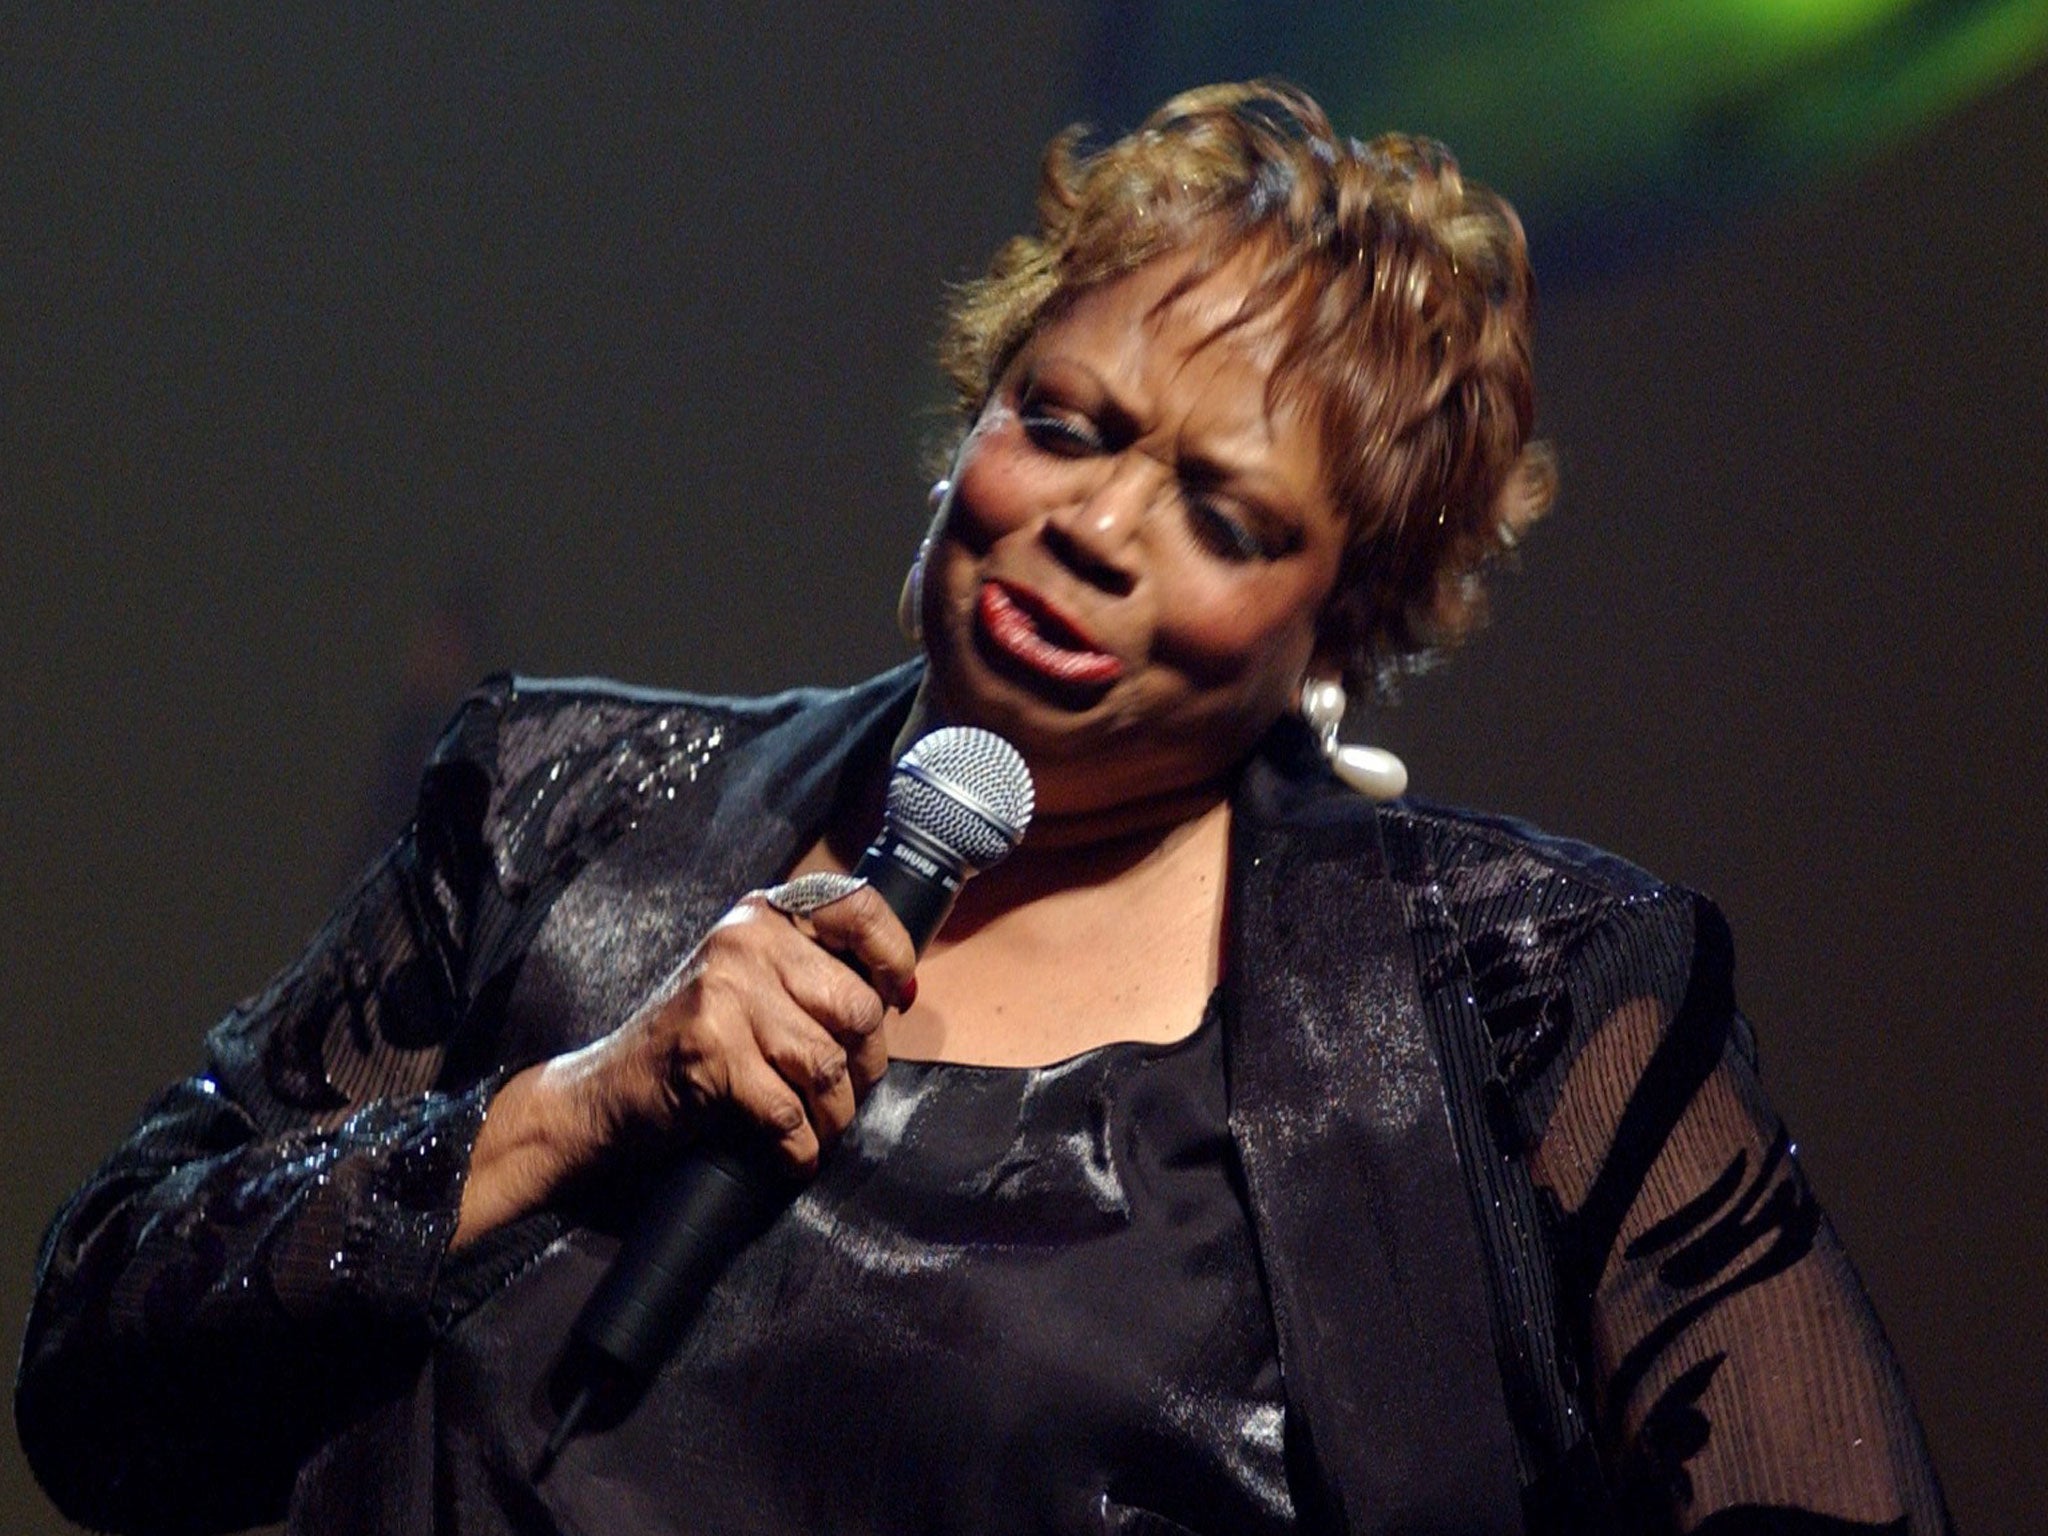 Fontella Bass was well known for her single 'Rescue Me'